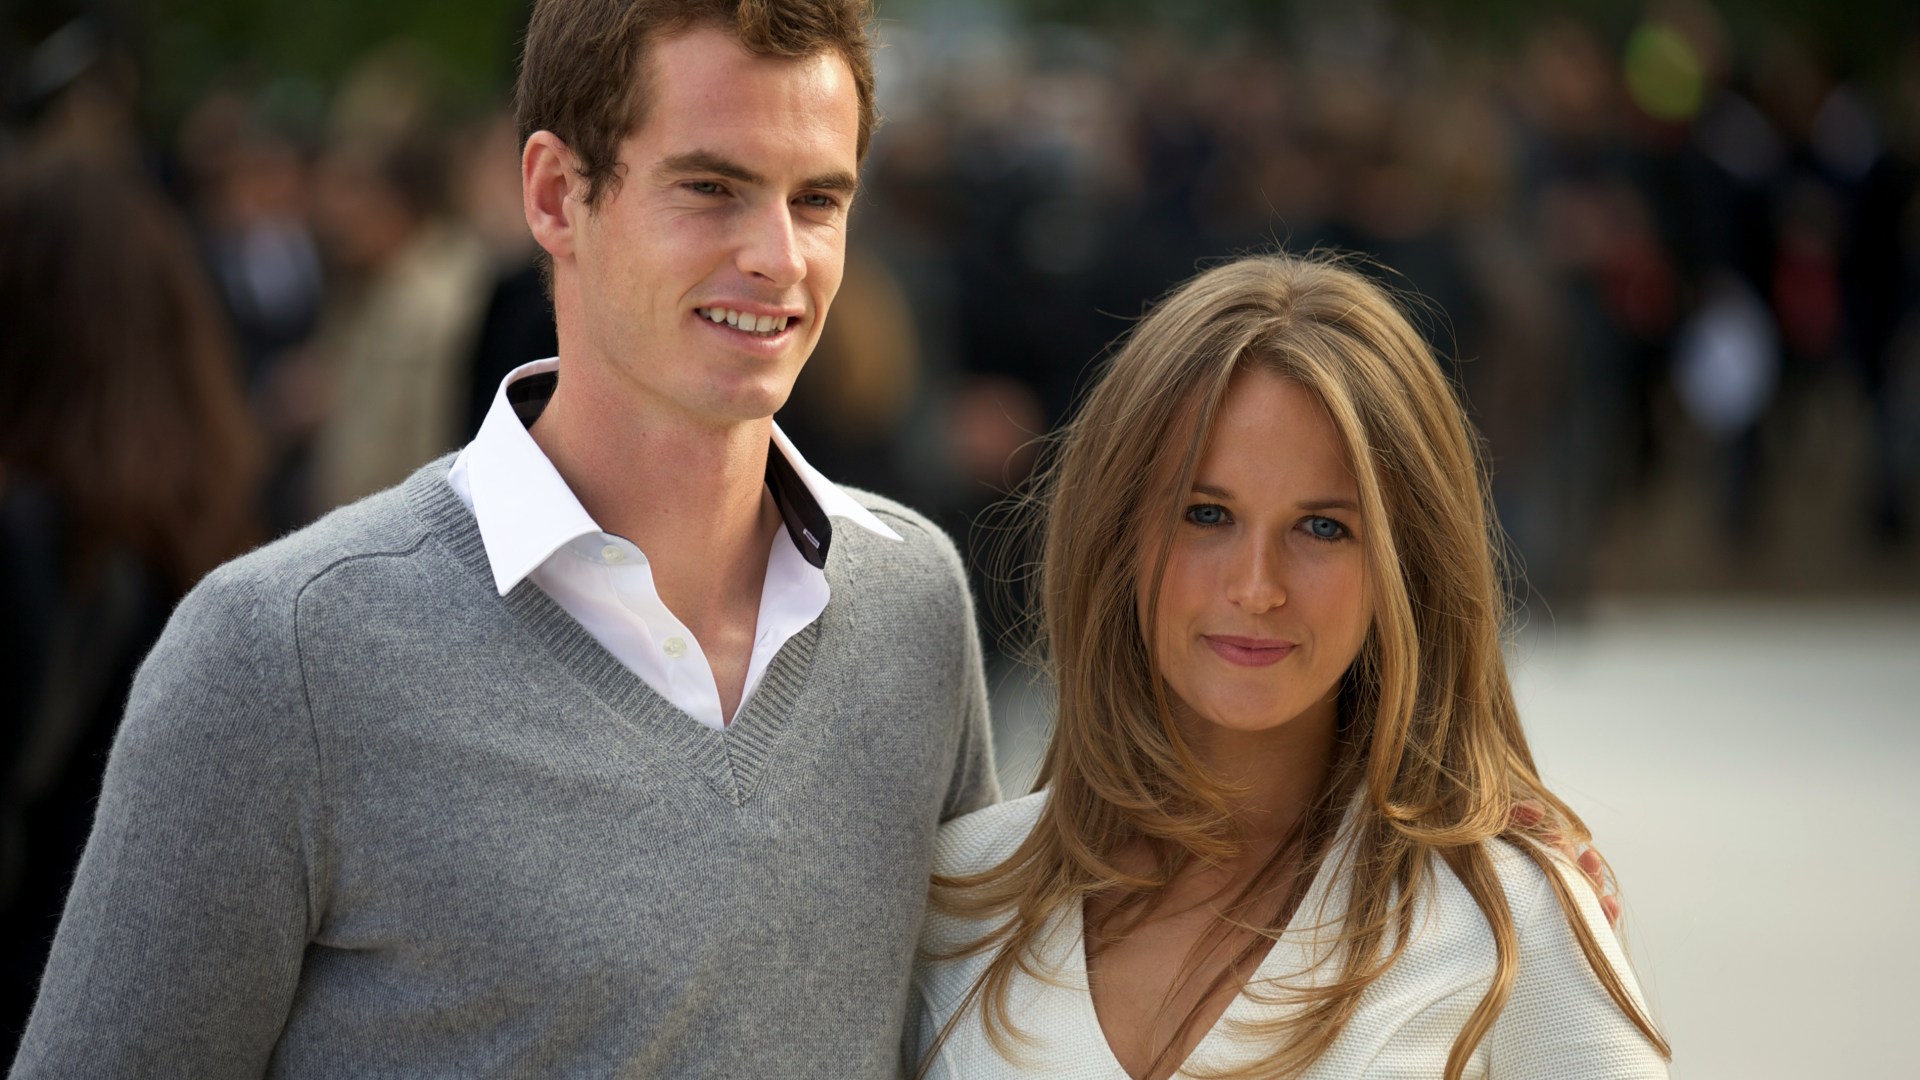 How many children does Andy Murray have with Kim Sears & what are their names? Meet the Wimbledon tennis star’s kids [Video]